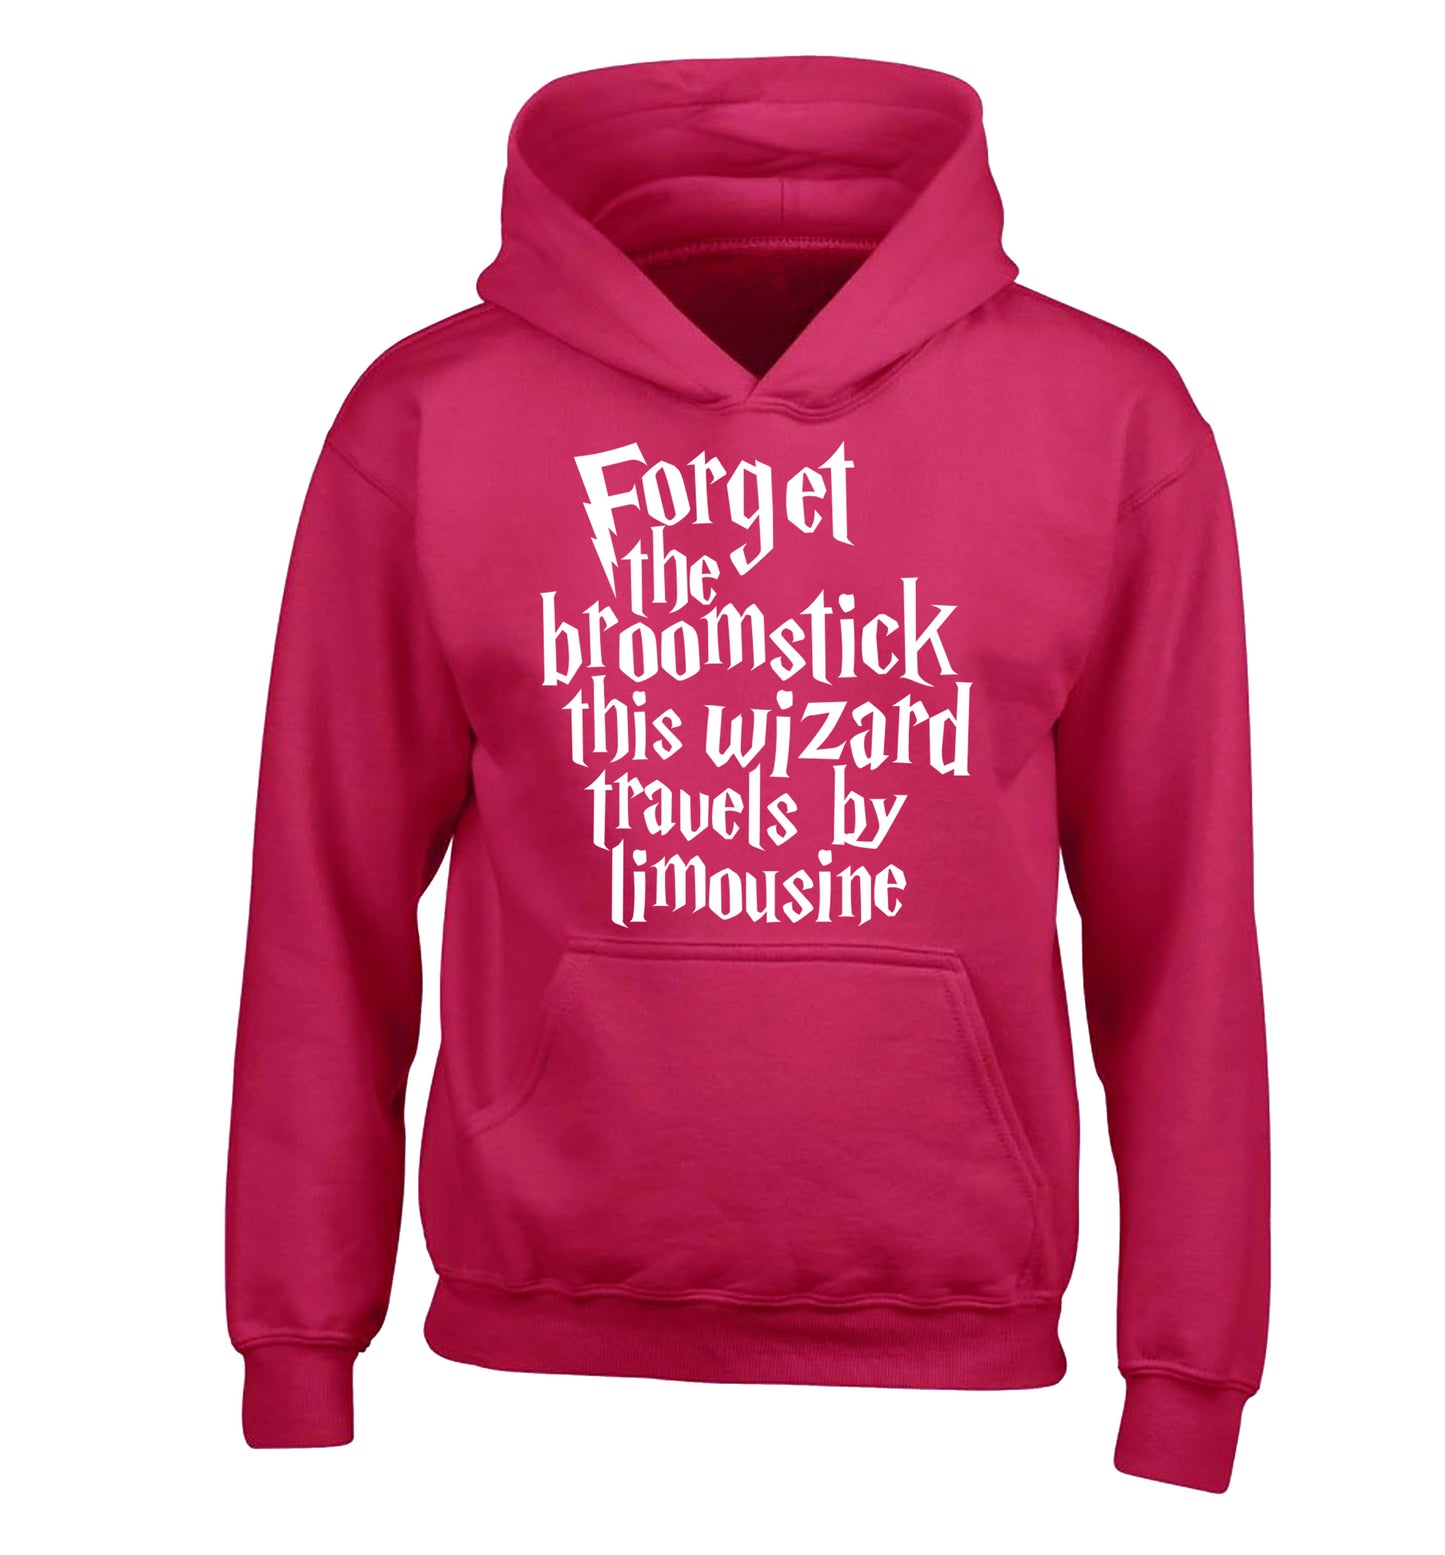 Forget the broomstick this wizard travels by limousine children's pink hoodie 12-14 Years